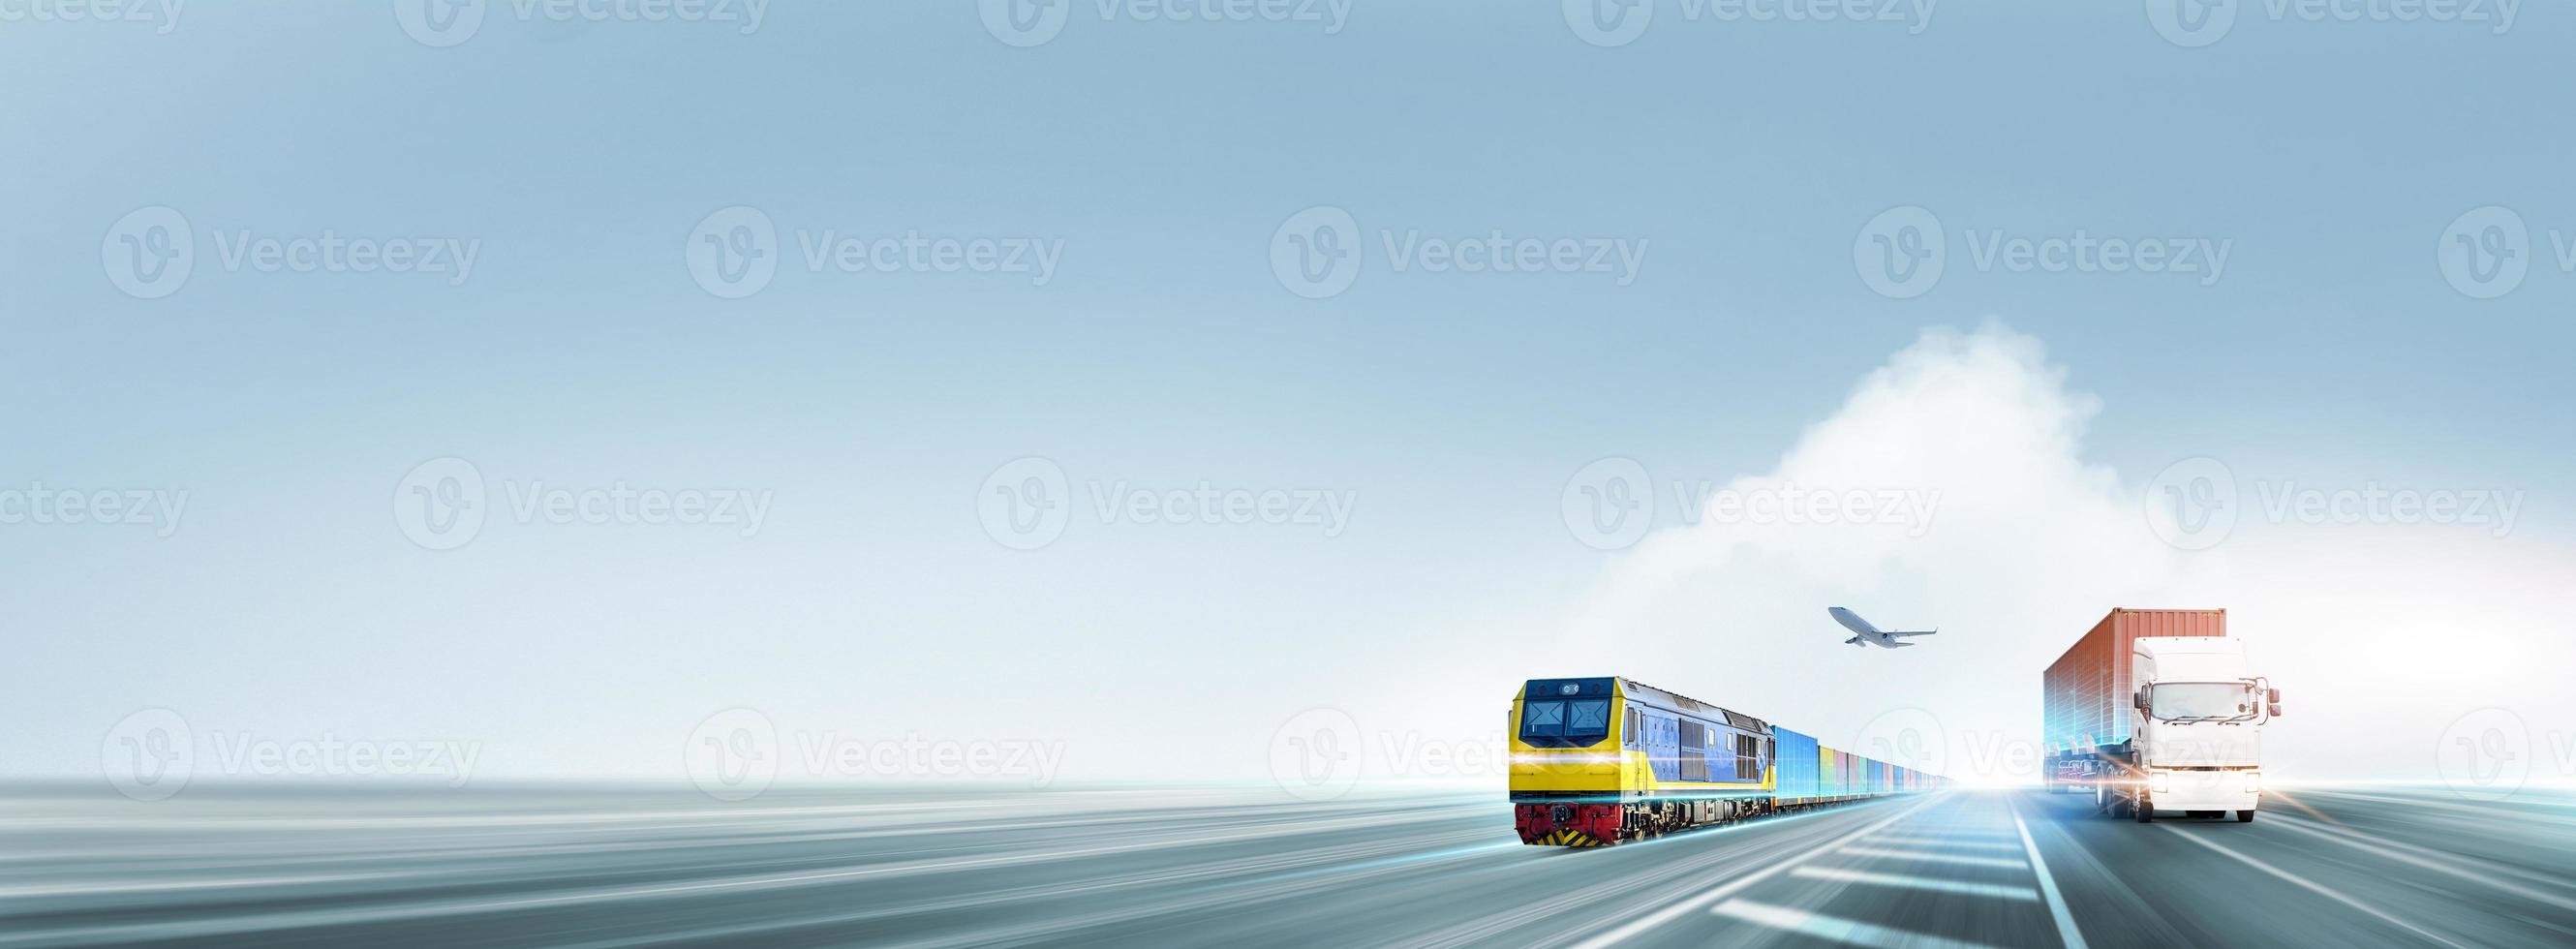 Technology Digital Future of Cargo Container Logistics Transport Concept, Freight Train, Plane, Truck on Highway Road at Blue Sky, Copy Space, Modern Futuristic Transportation Import Export Background photo